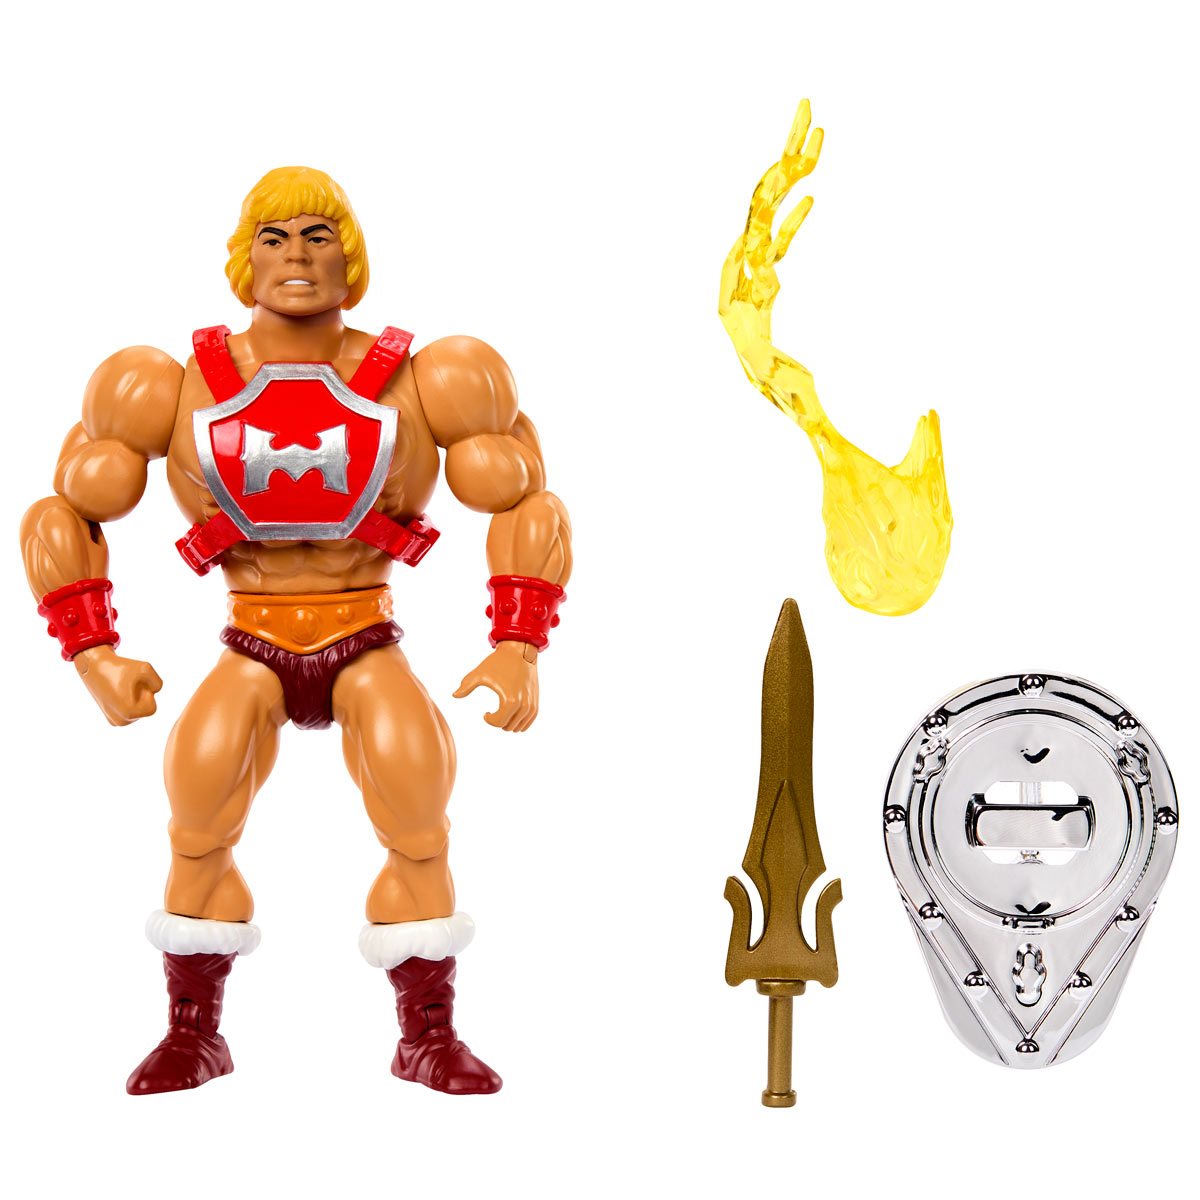 US Import!!! Masters of the Universe Origins Thunder Punch He-Man Deluxe Action Figure MTHKM81 194735104178